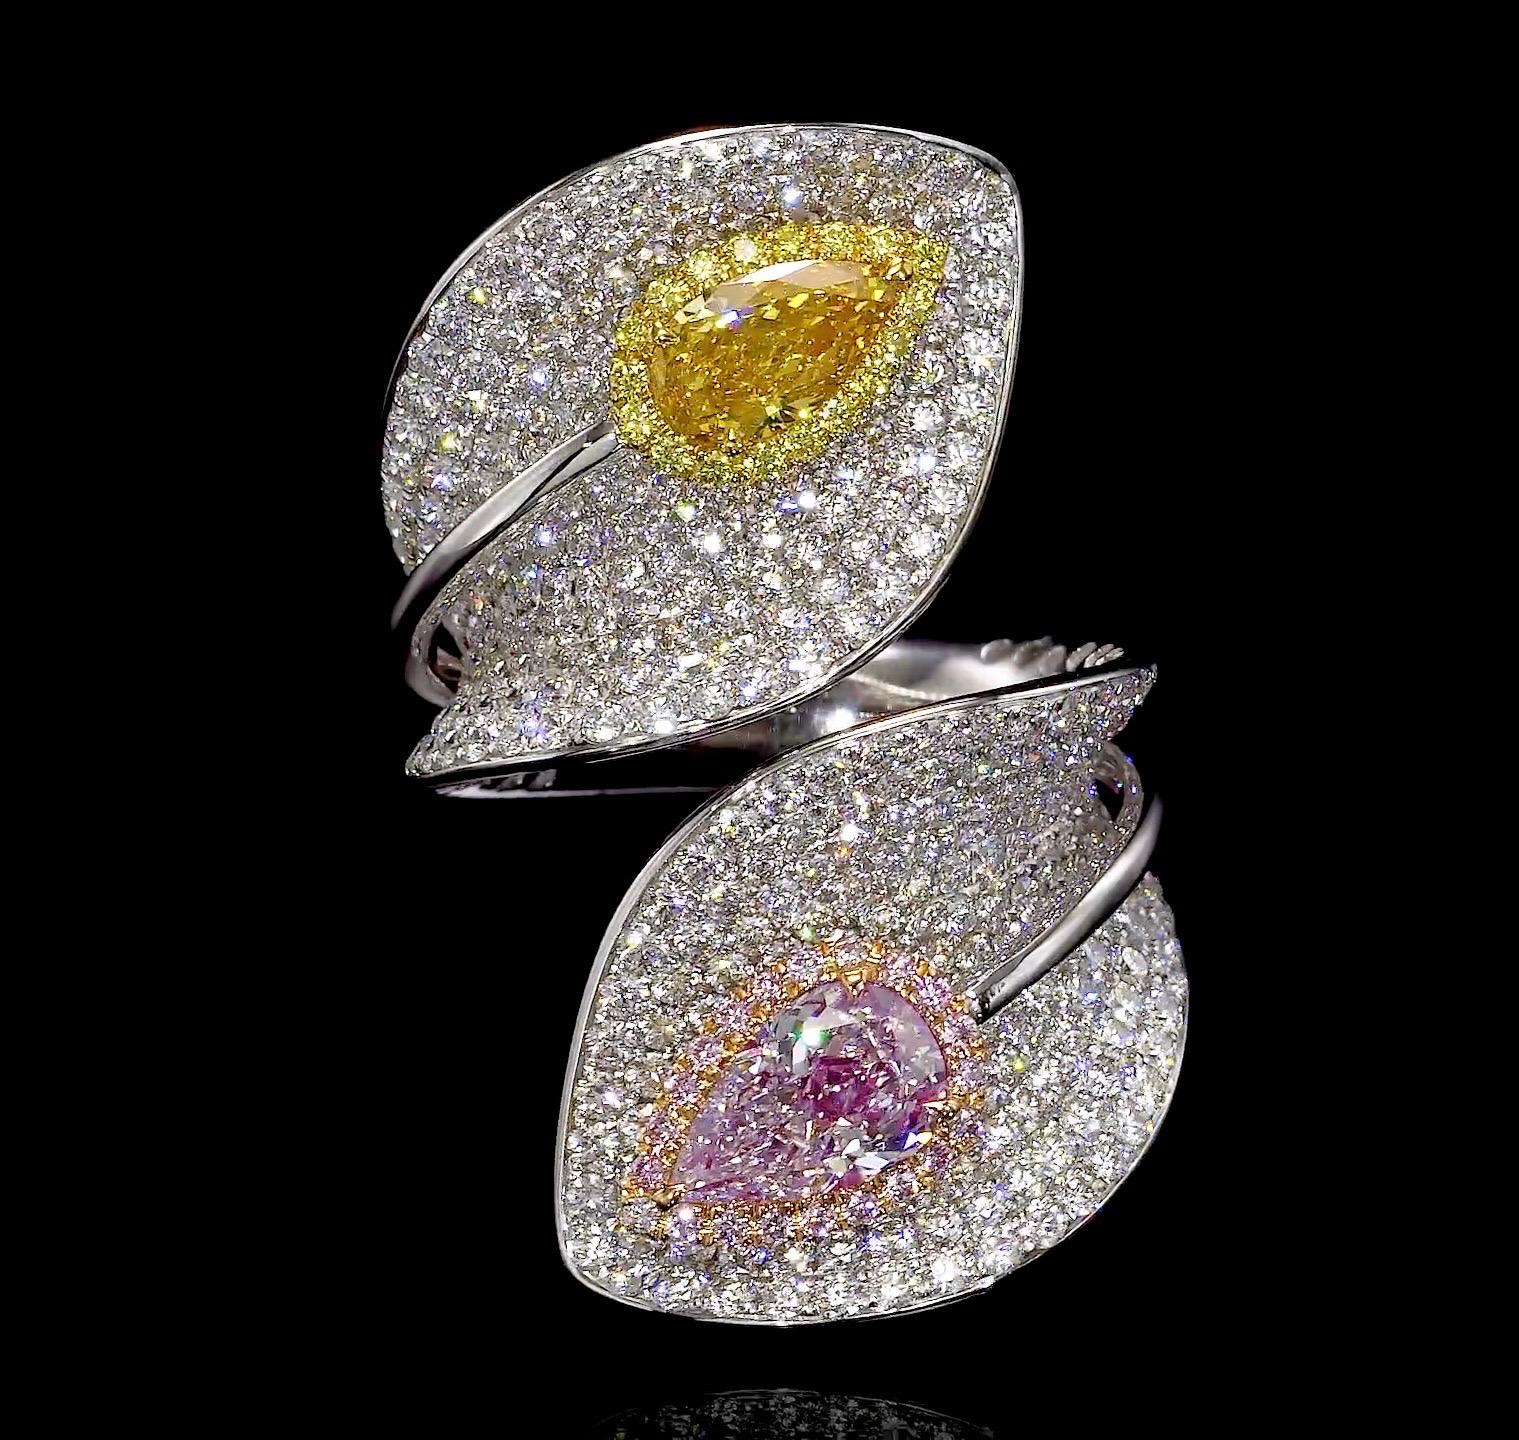 Pear Cut Emilio Jewelry Gia Certified Vivid Orangey Yellow And Pink Diamond Ring For Sale